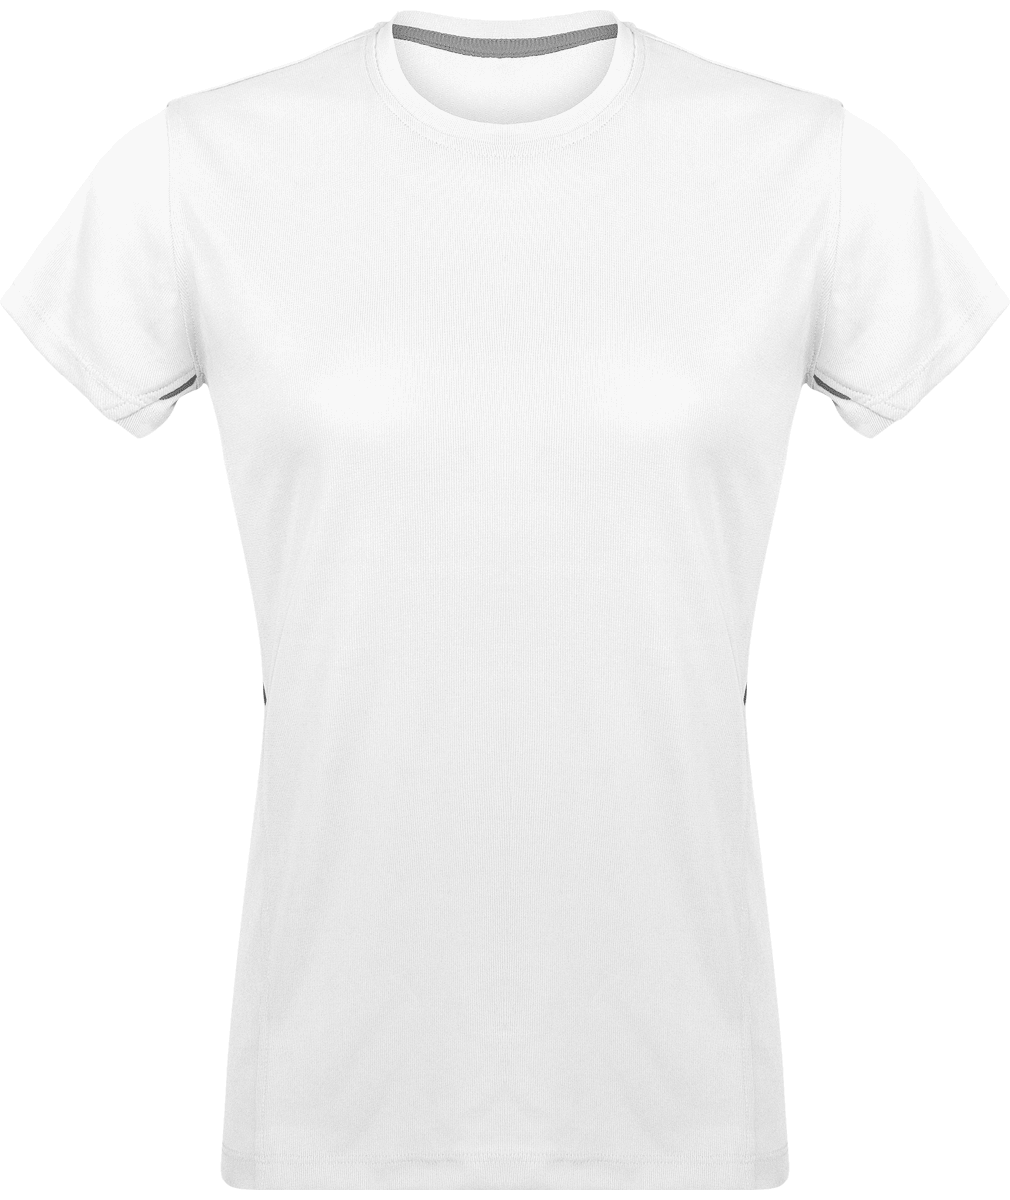 Sport Woman T-Shirt | Lightweight And Breathable | Bi-Material White / Silver